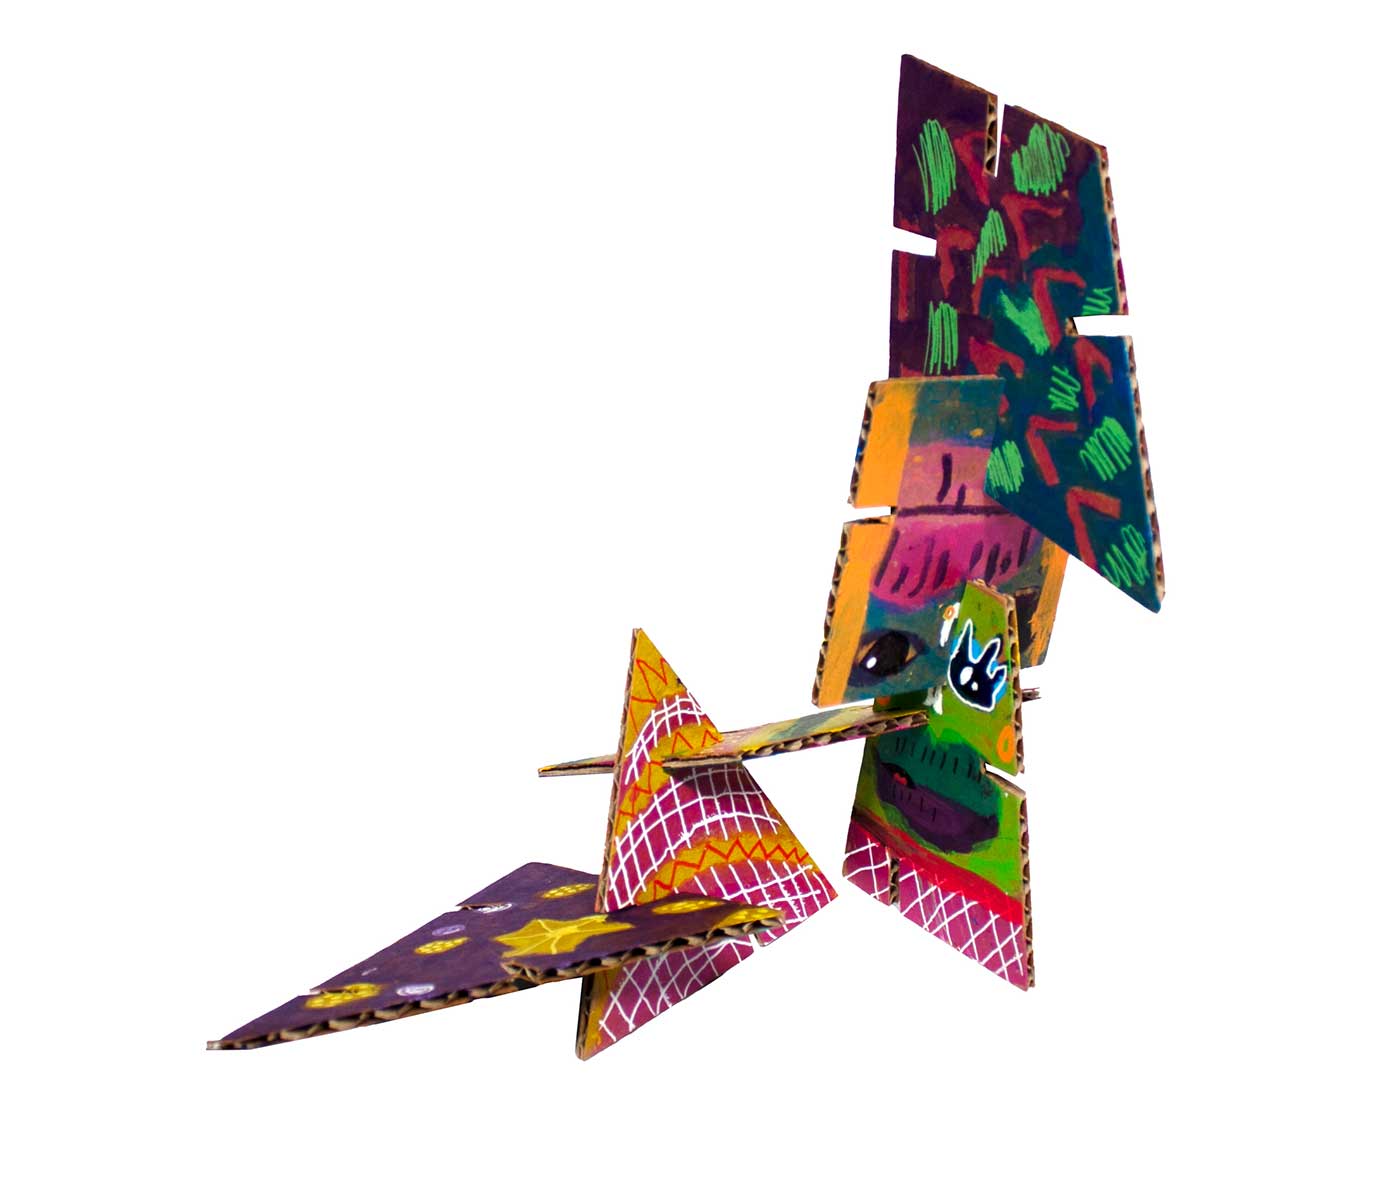 Geometric sculpture made with colorful patterned shapes showcasing stripes and spirals.